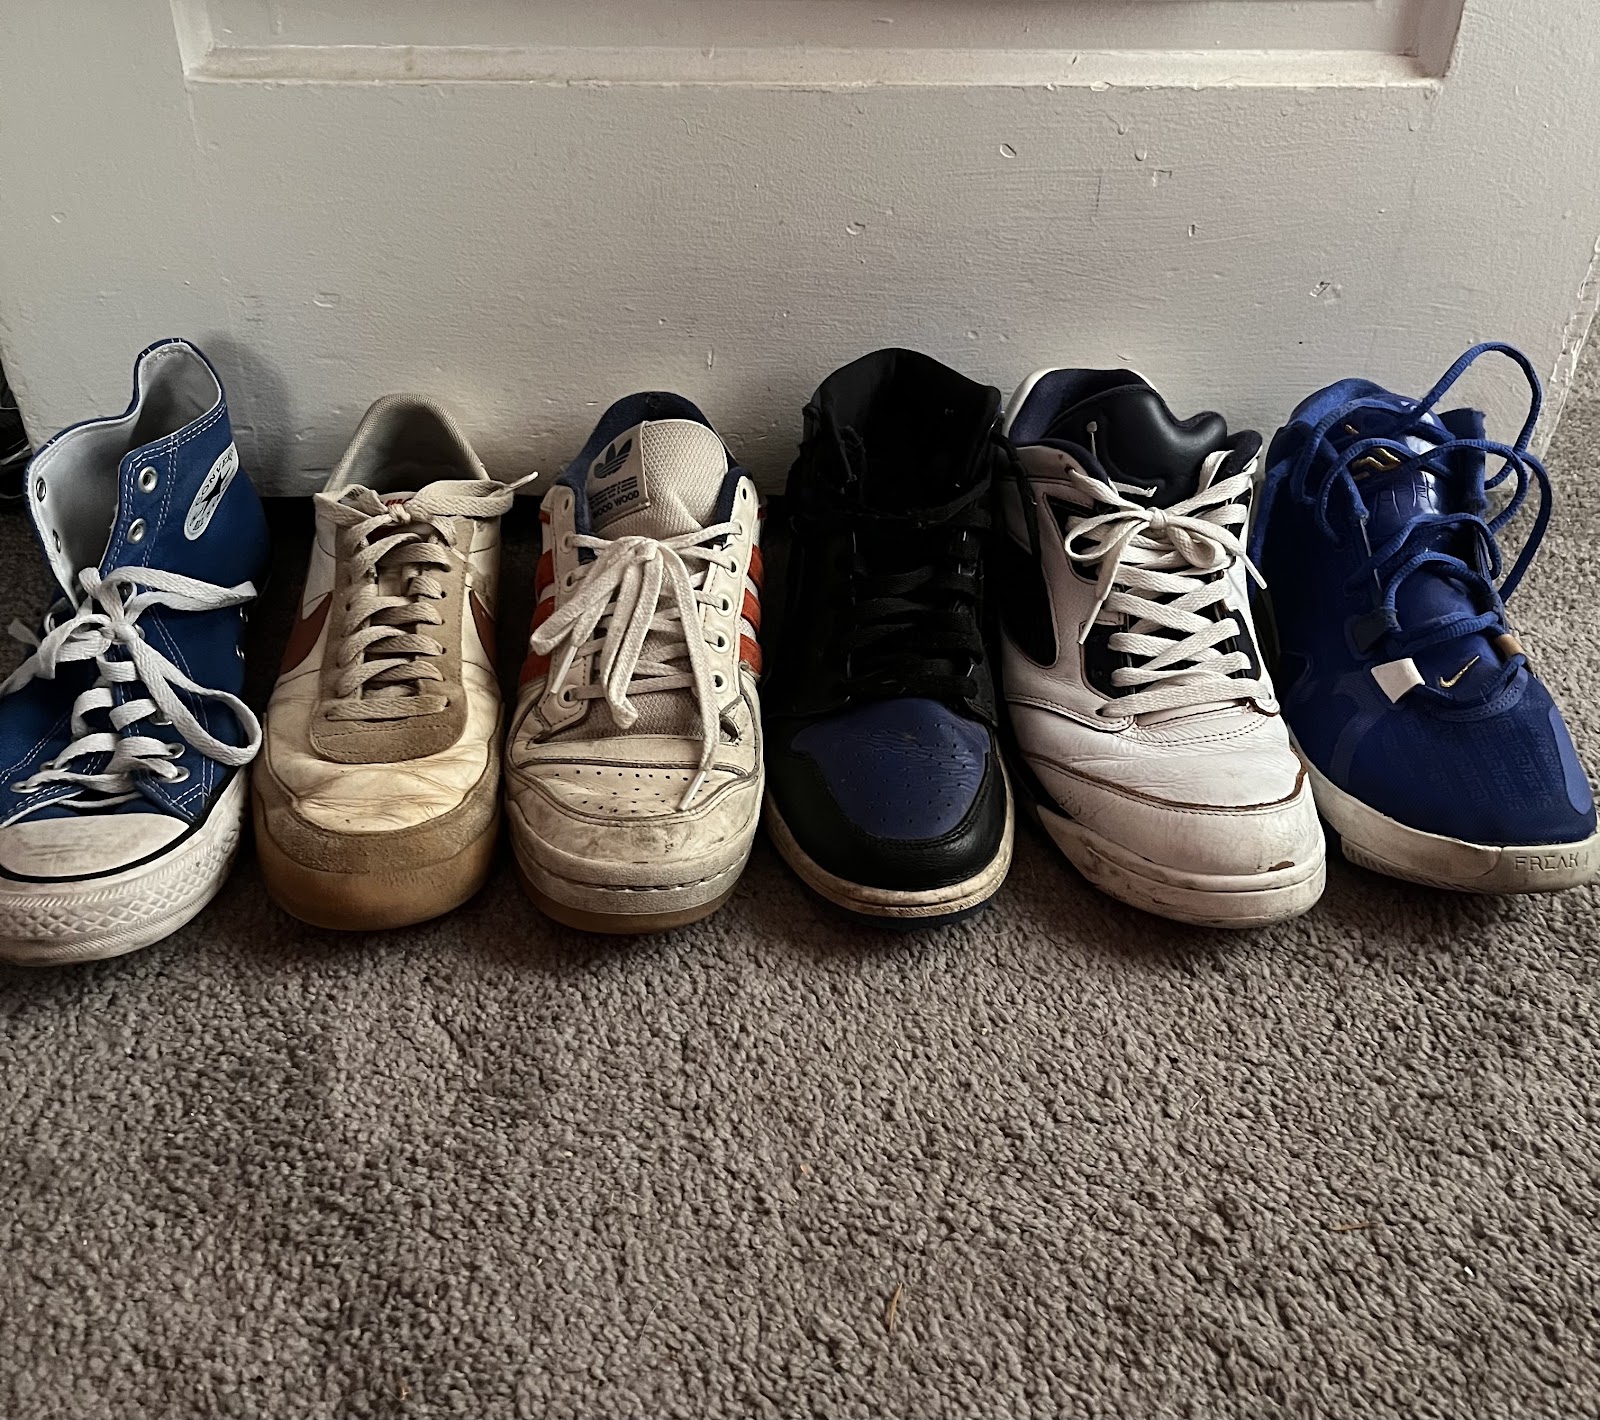 of Basketball Shoes | Post